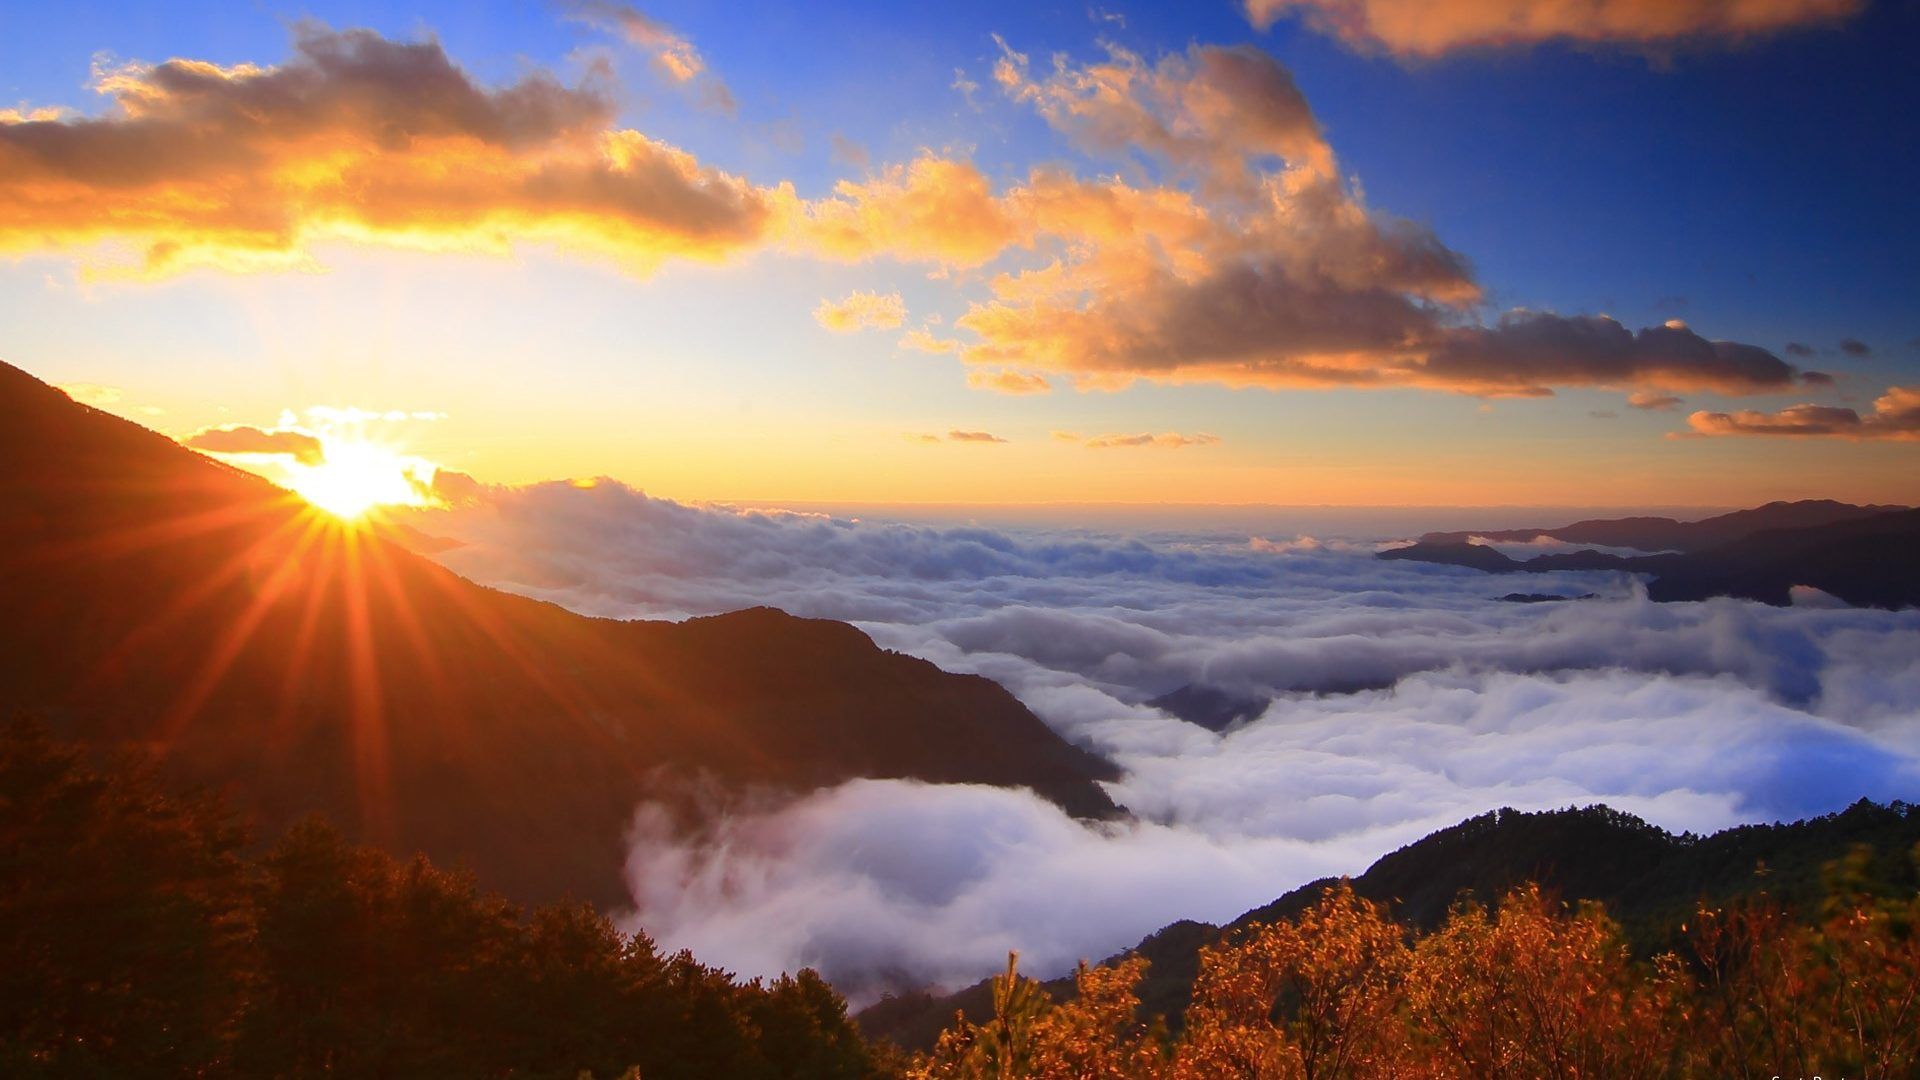 Sunrise Mountains Mountain Clouds Sky Picture For Desktop